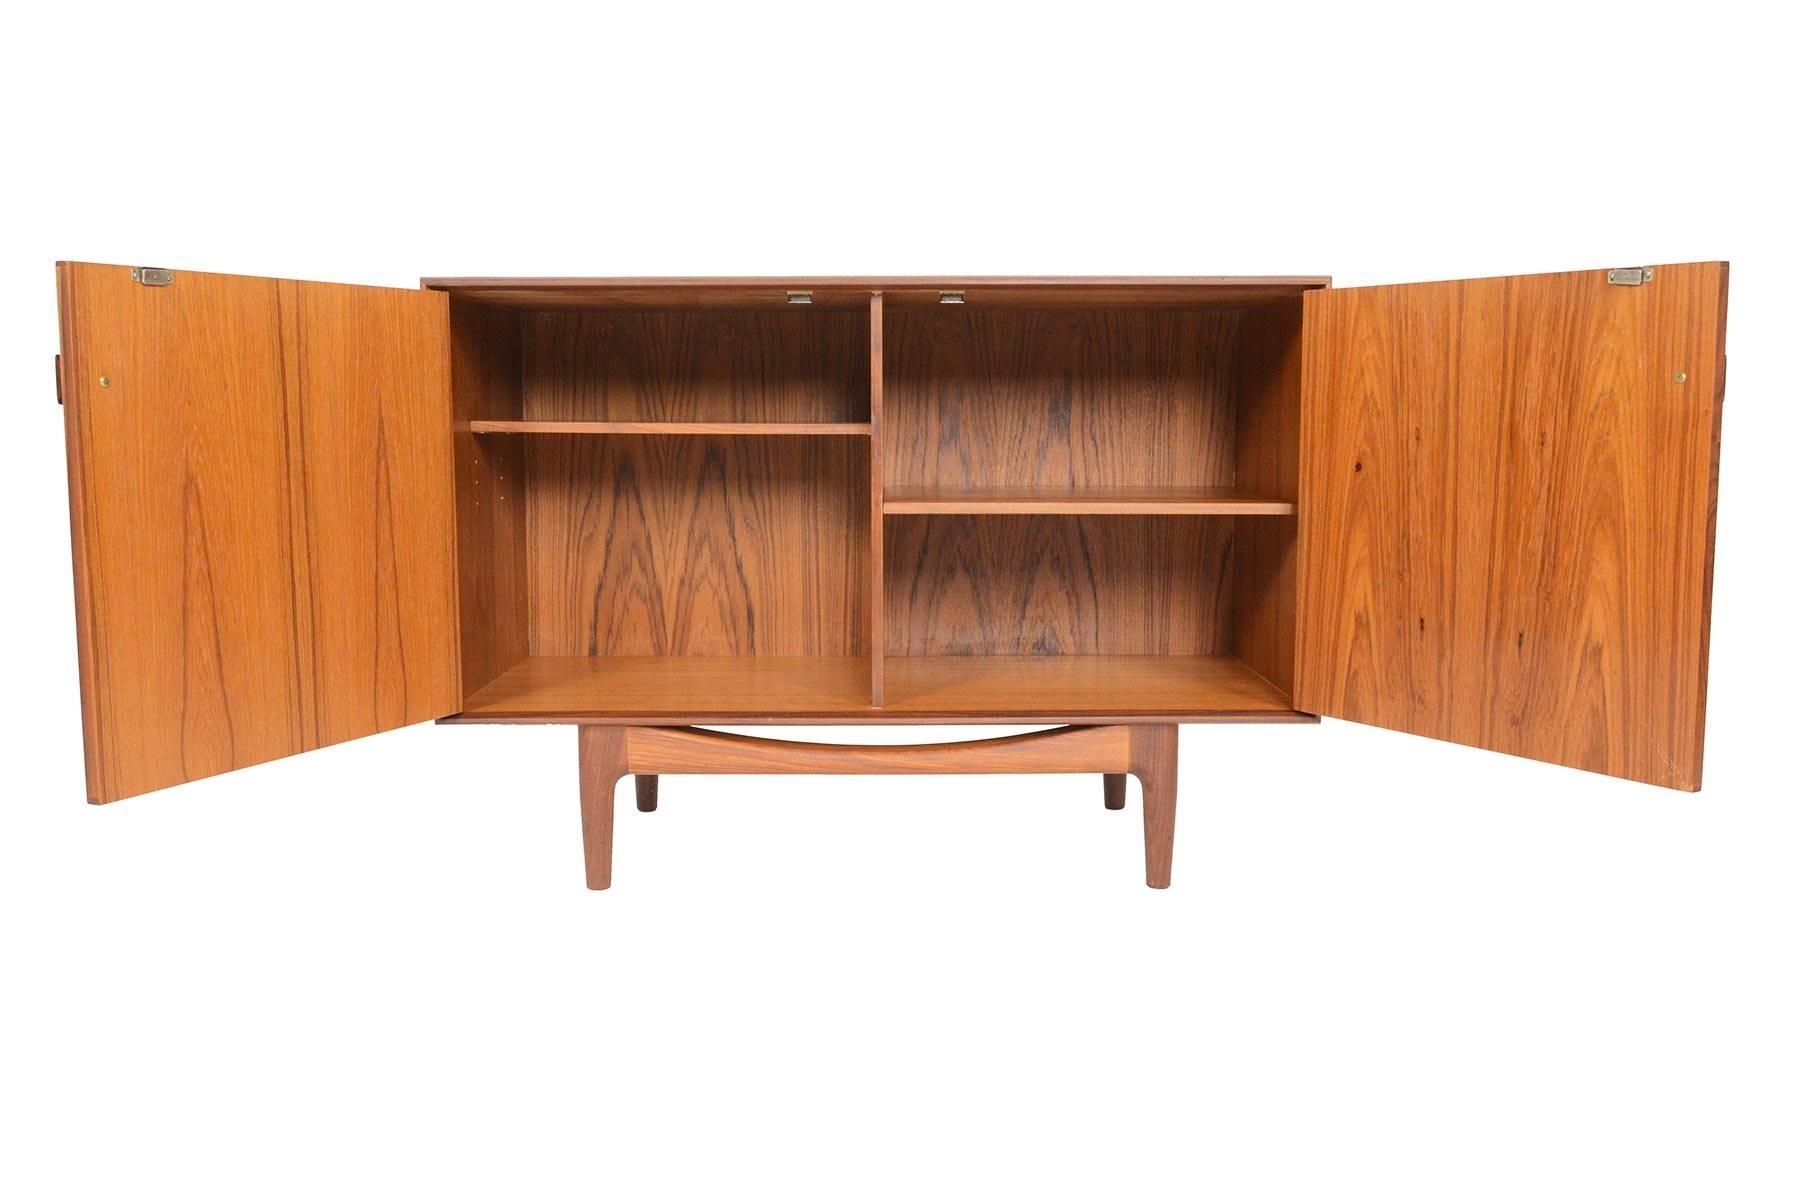 This small midcentury teak credenza was designed by Ib Kofod Larsen for G Plan in 1961 for the Danish range. Crafted in teak and afrormosia with handsomely refined lines, two wide doors open to reveal two bays with adjustable shelving. Finished on